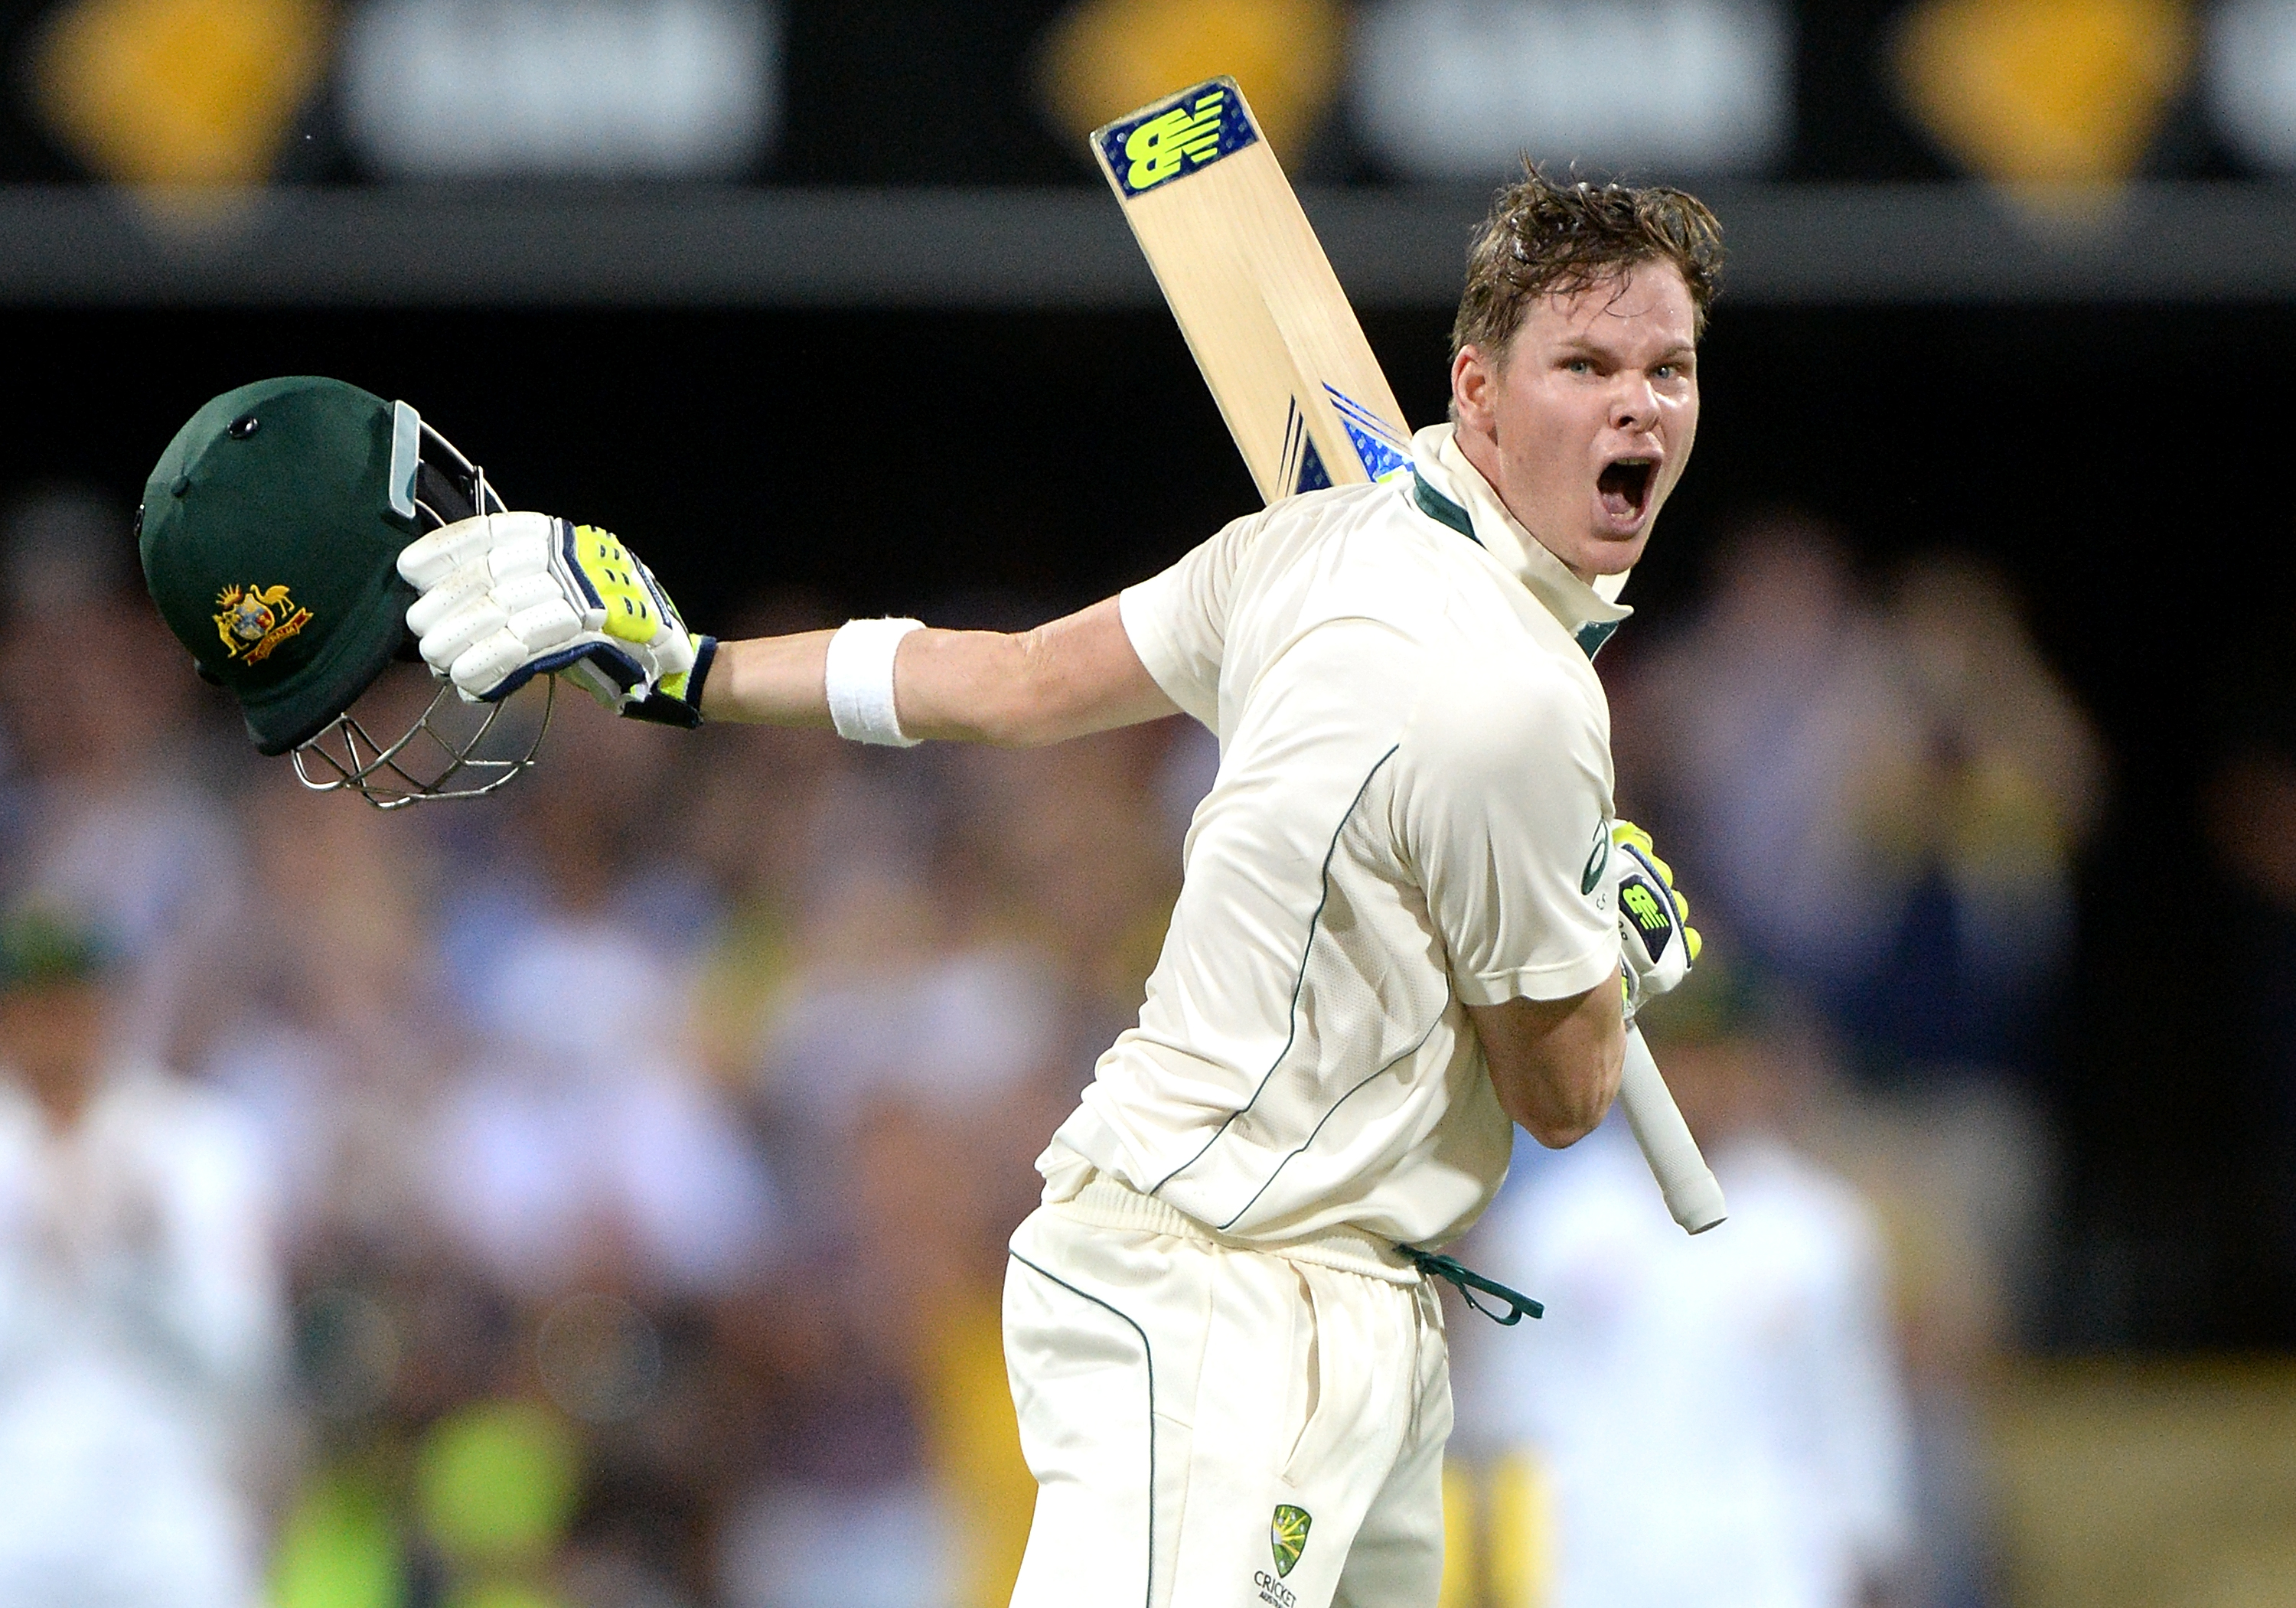 Ashes 2021-22 | Steve Smith will make some really big scores in next three Tests, predicts Marnus Labuschagne